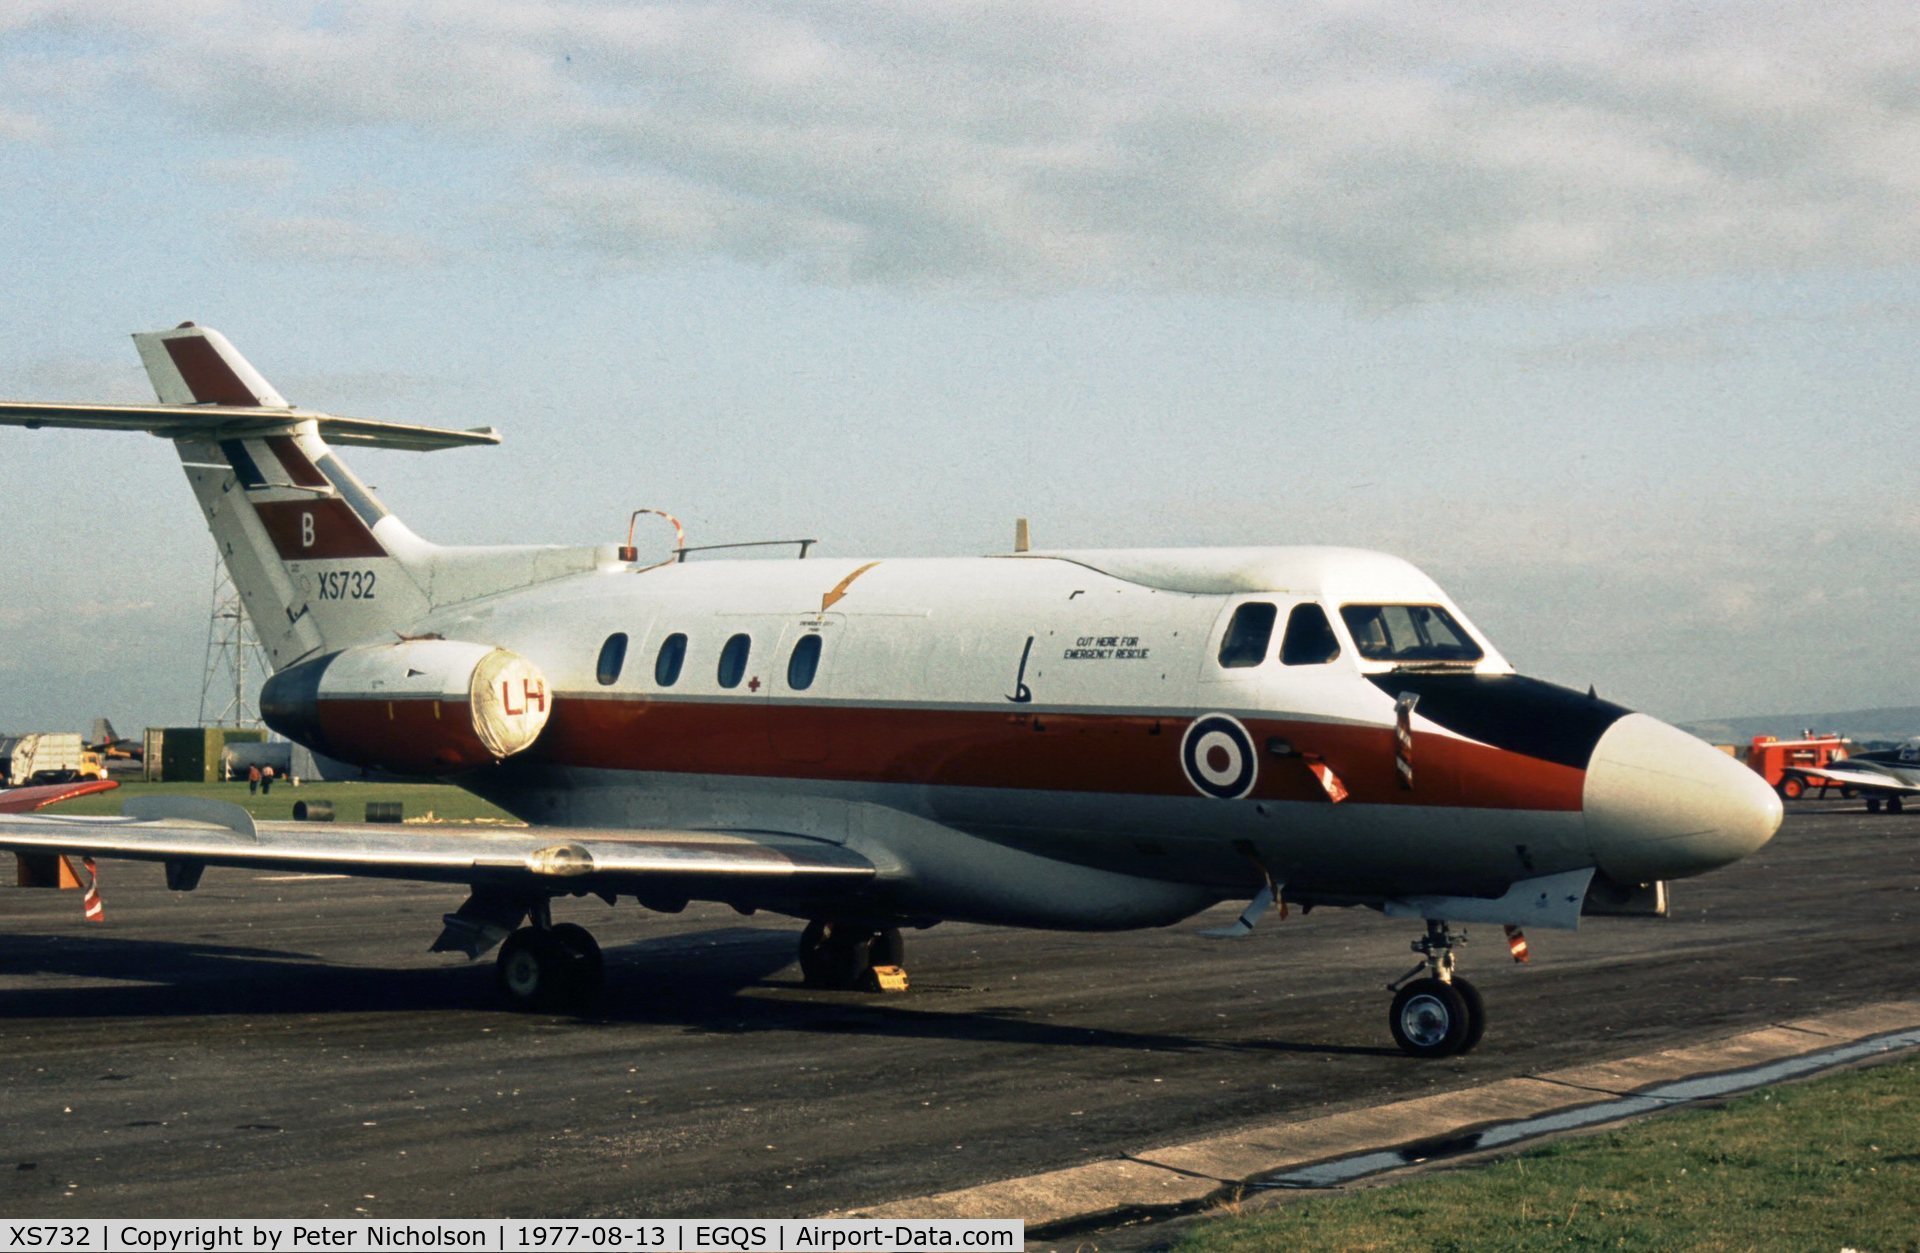 XS732, 1966 Hawker Siddeley HS.125 Dominie T.1 C/N 25056, Dominie T.1 of 6 Flying Training School at the 1977 RAF Lossiemouth Open Day.